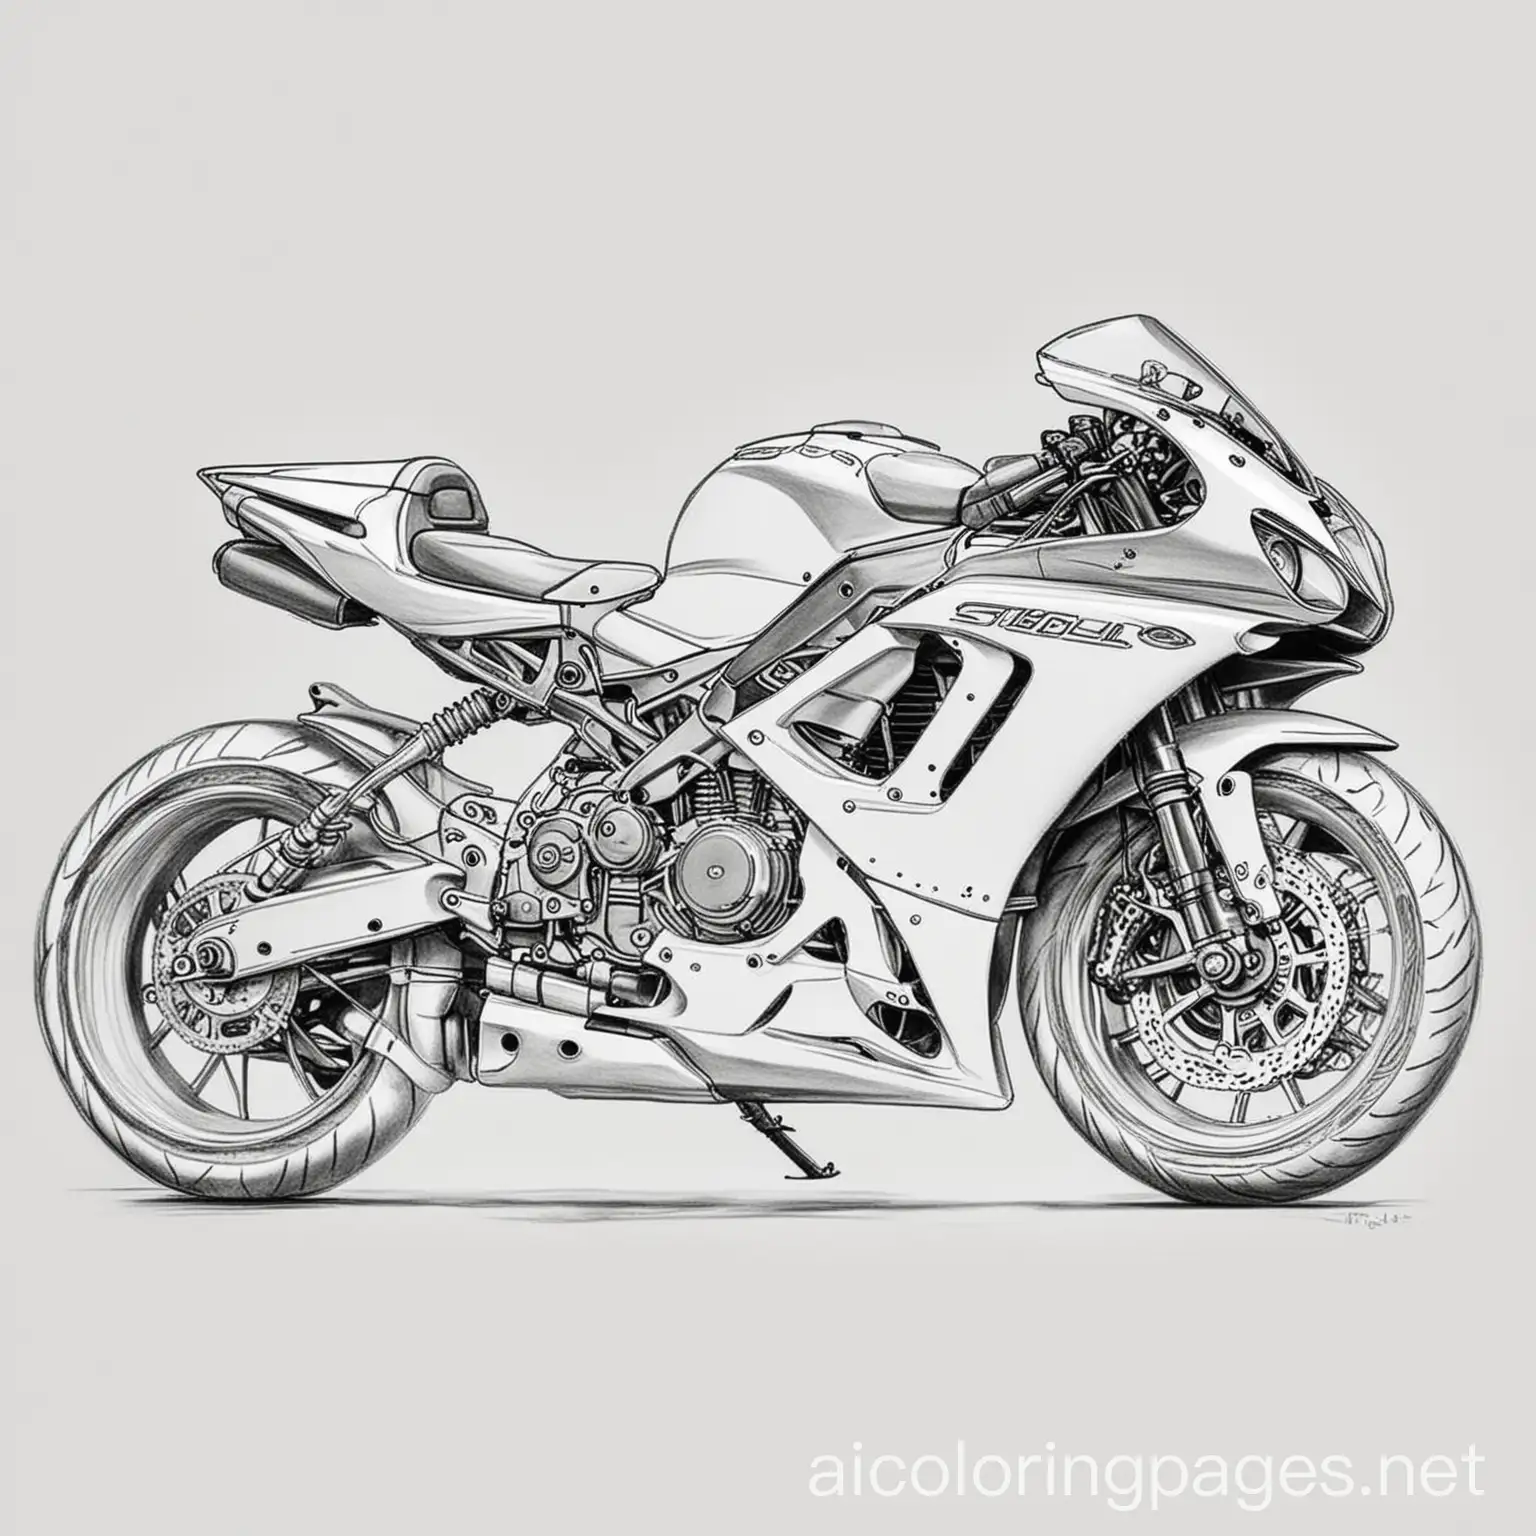 Motorcycle-Coloring-Page-Simple-Line-Art-on-White-Background